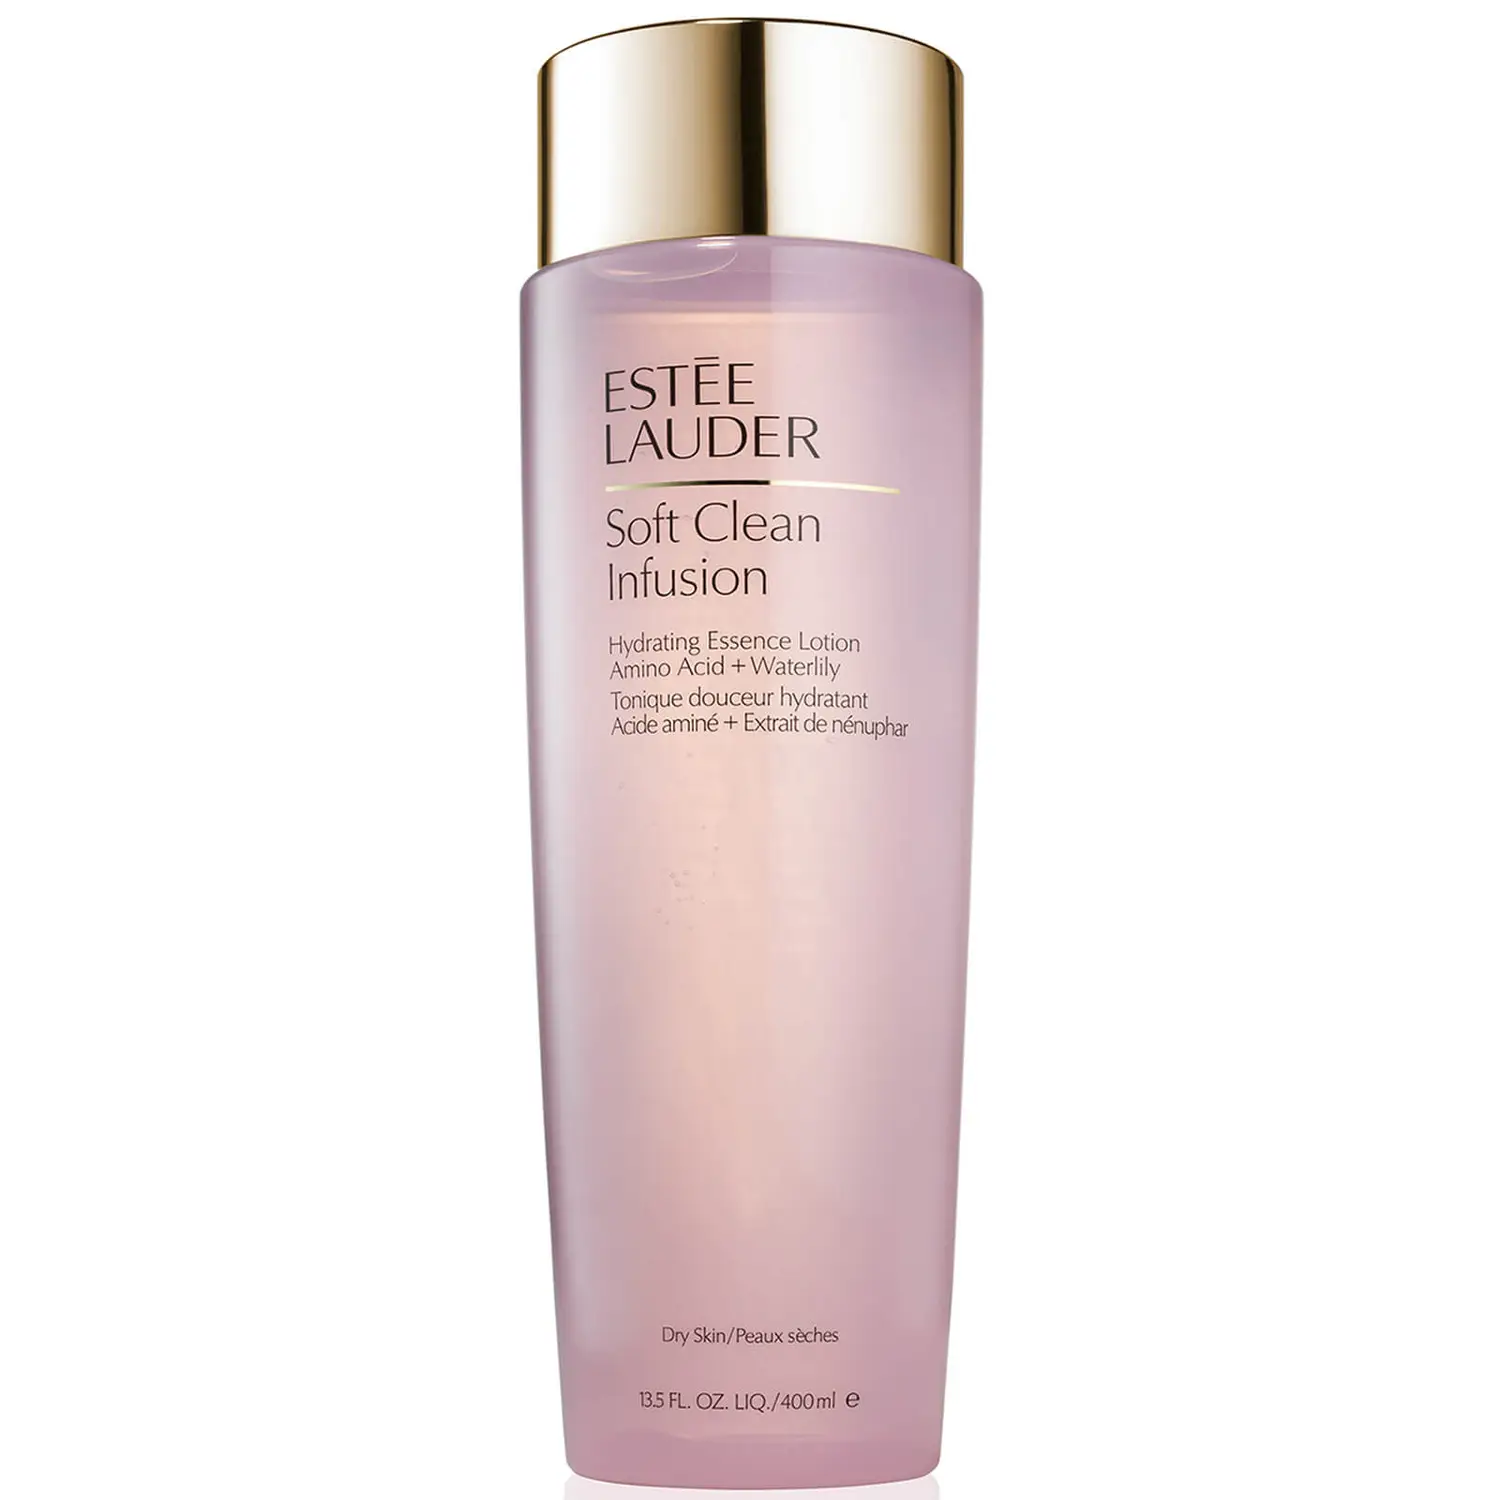 Estee Lauder Soft Clean Infusion Hydrating Essence Lotion 400ml